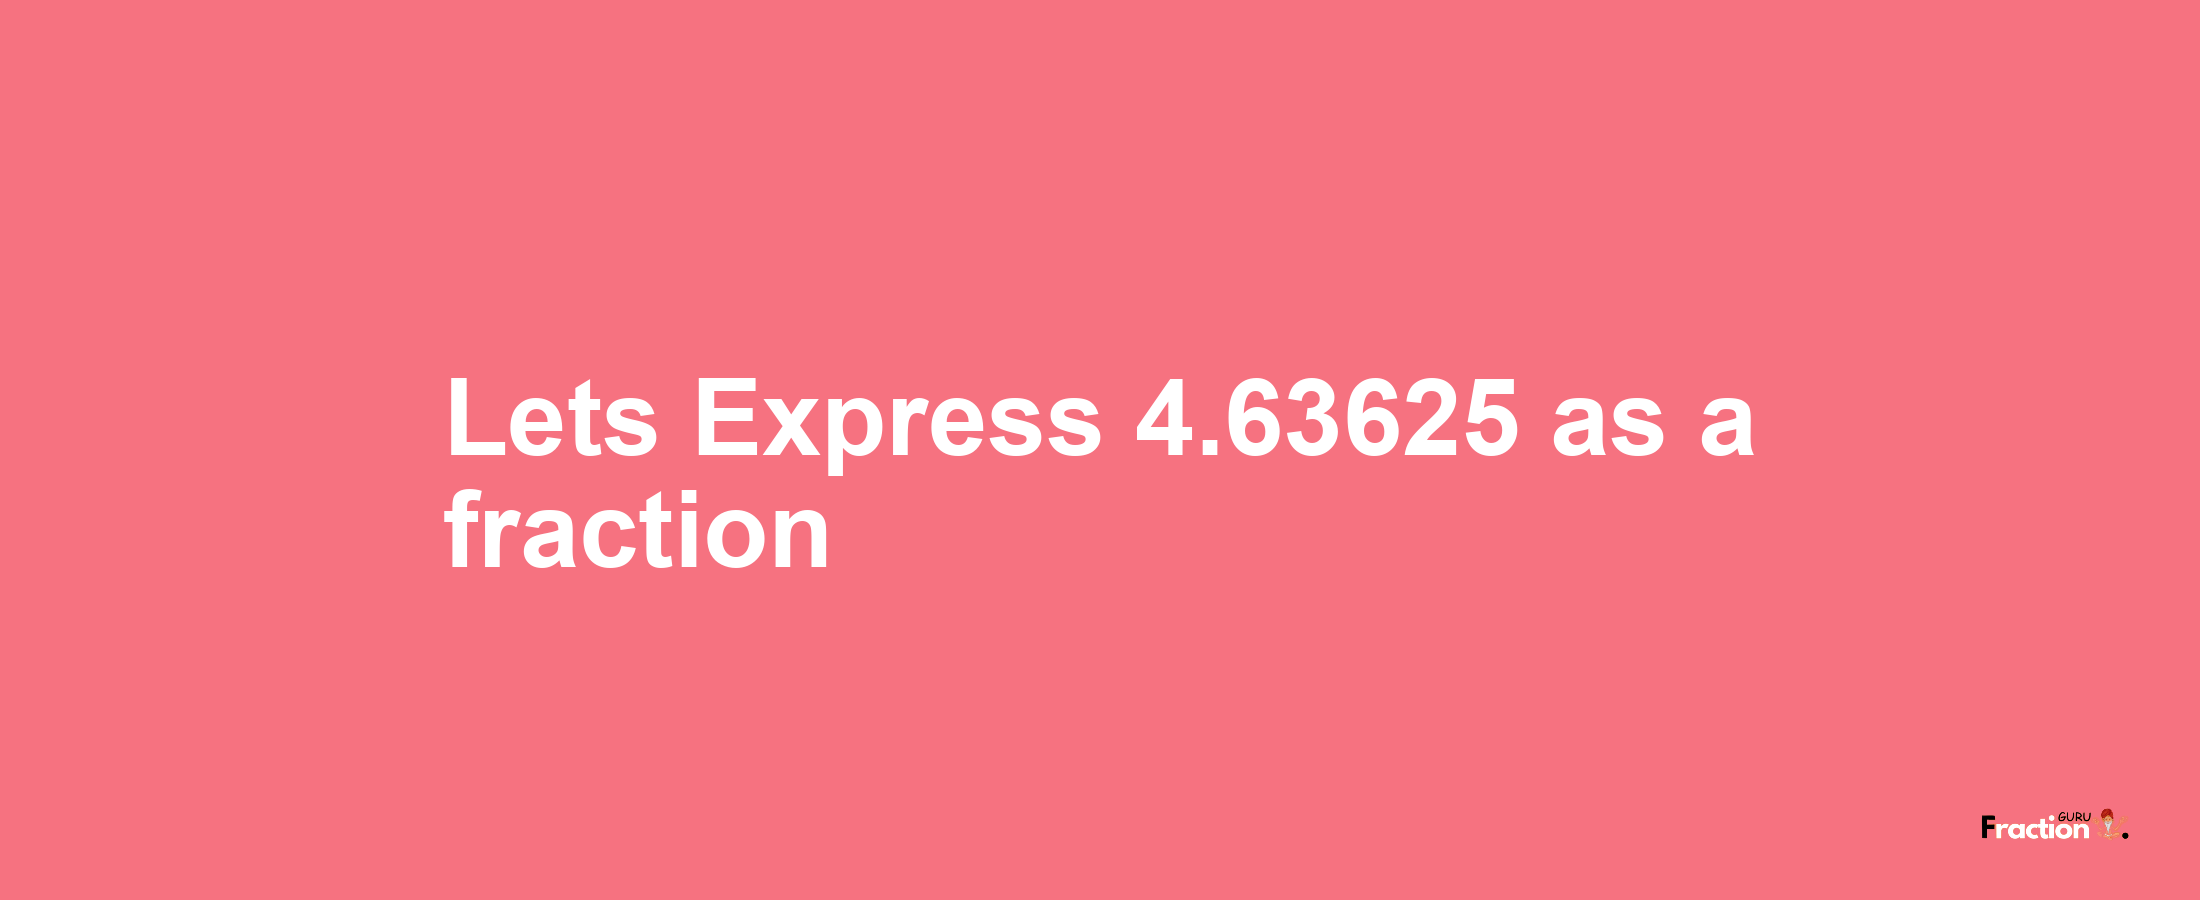 Lets Express 4.63625 as afraction